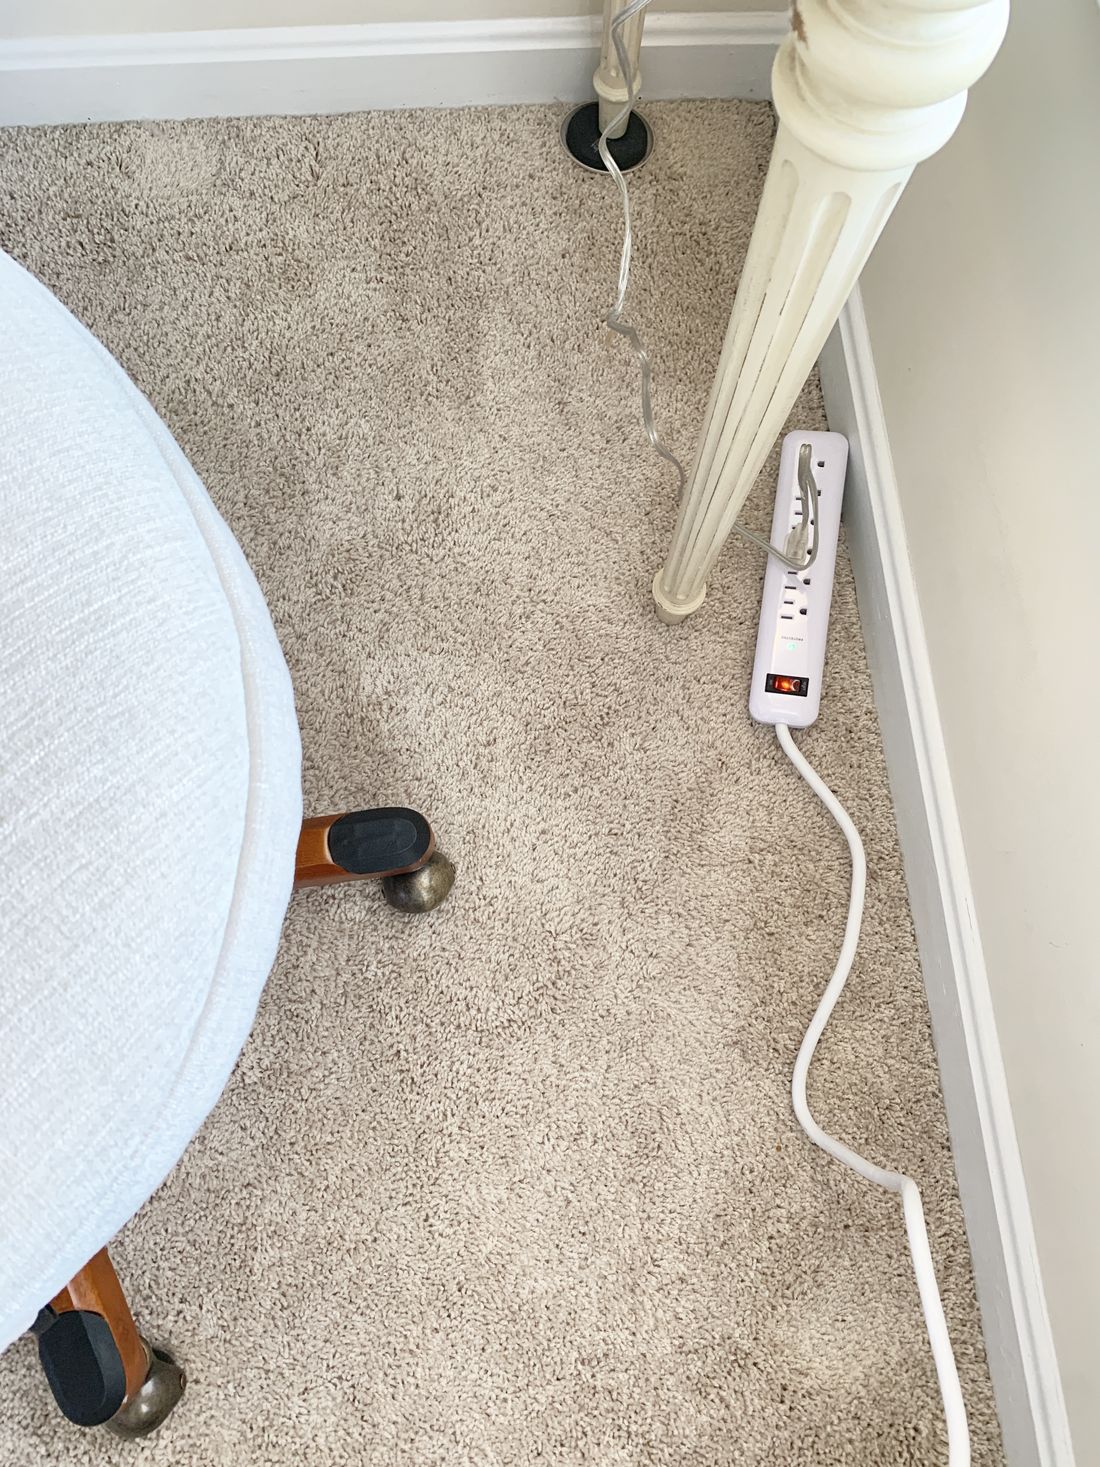 Lowe’s Power Cord for Home Office Decor